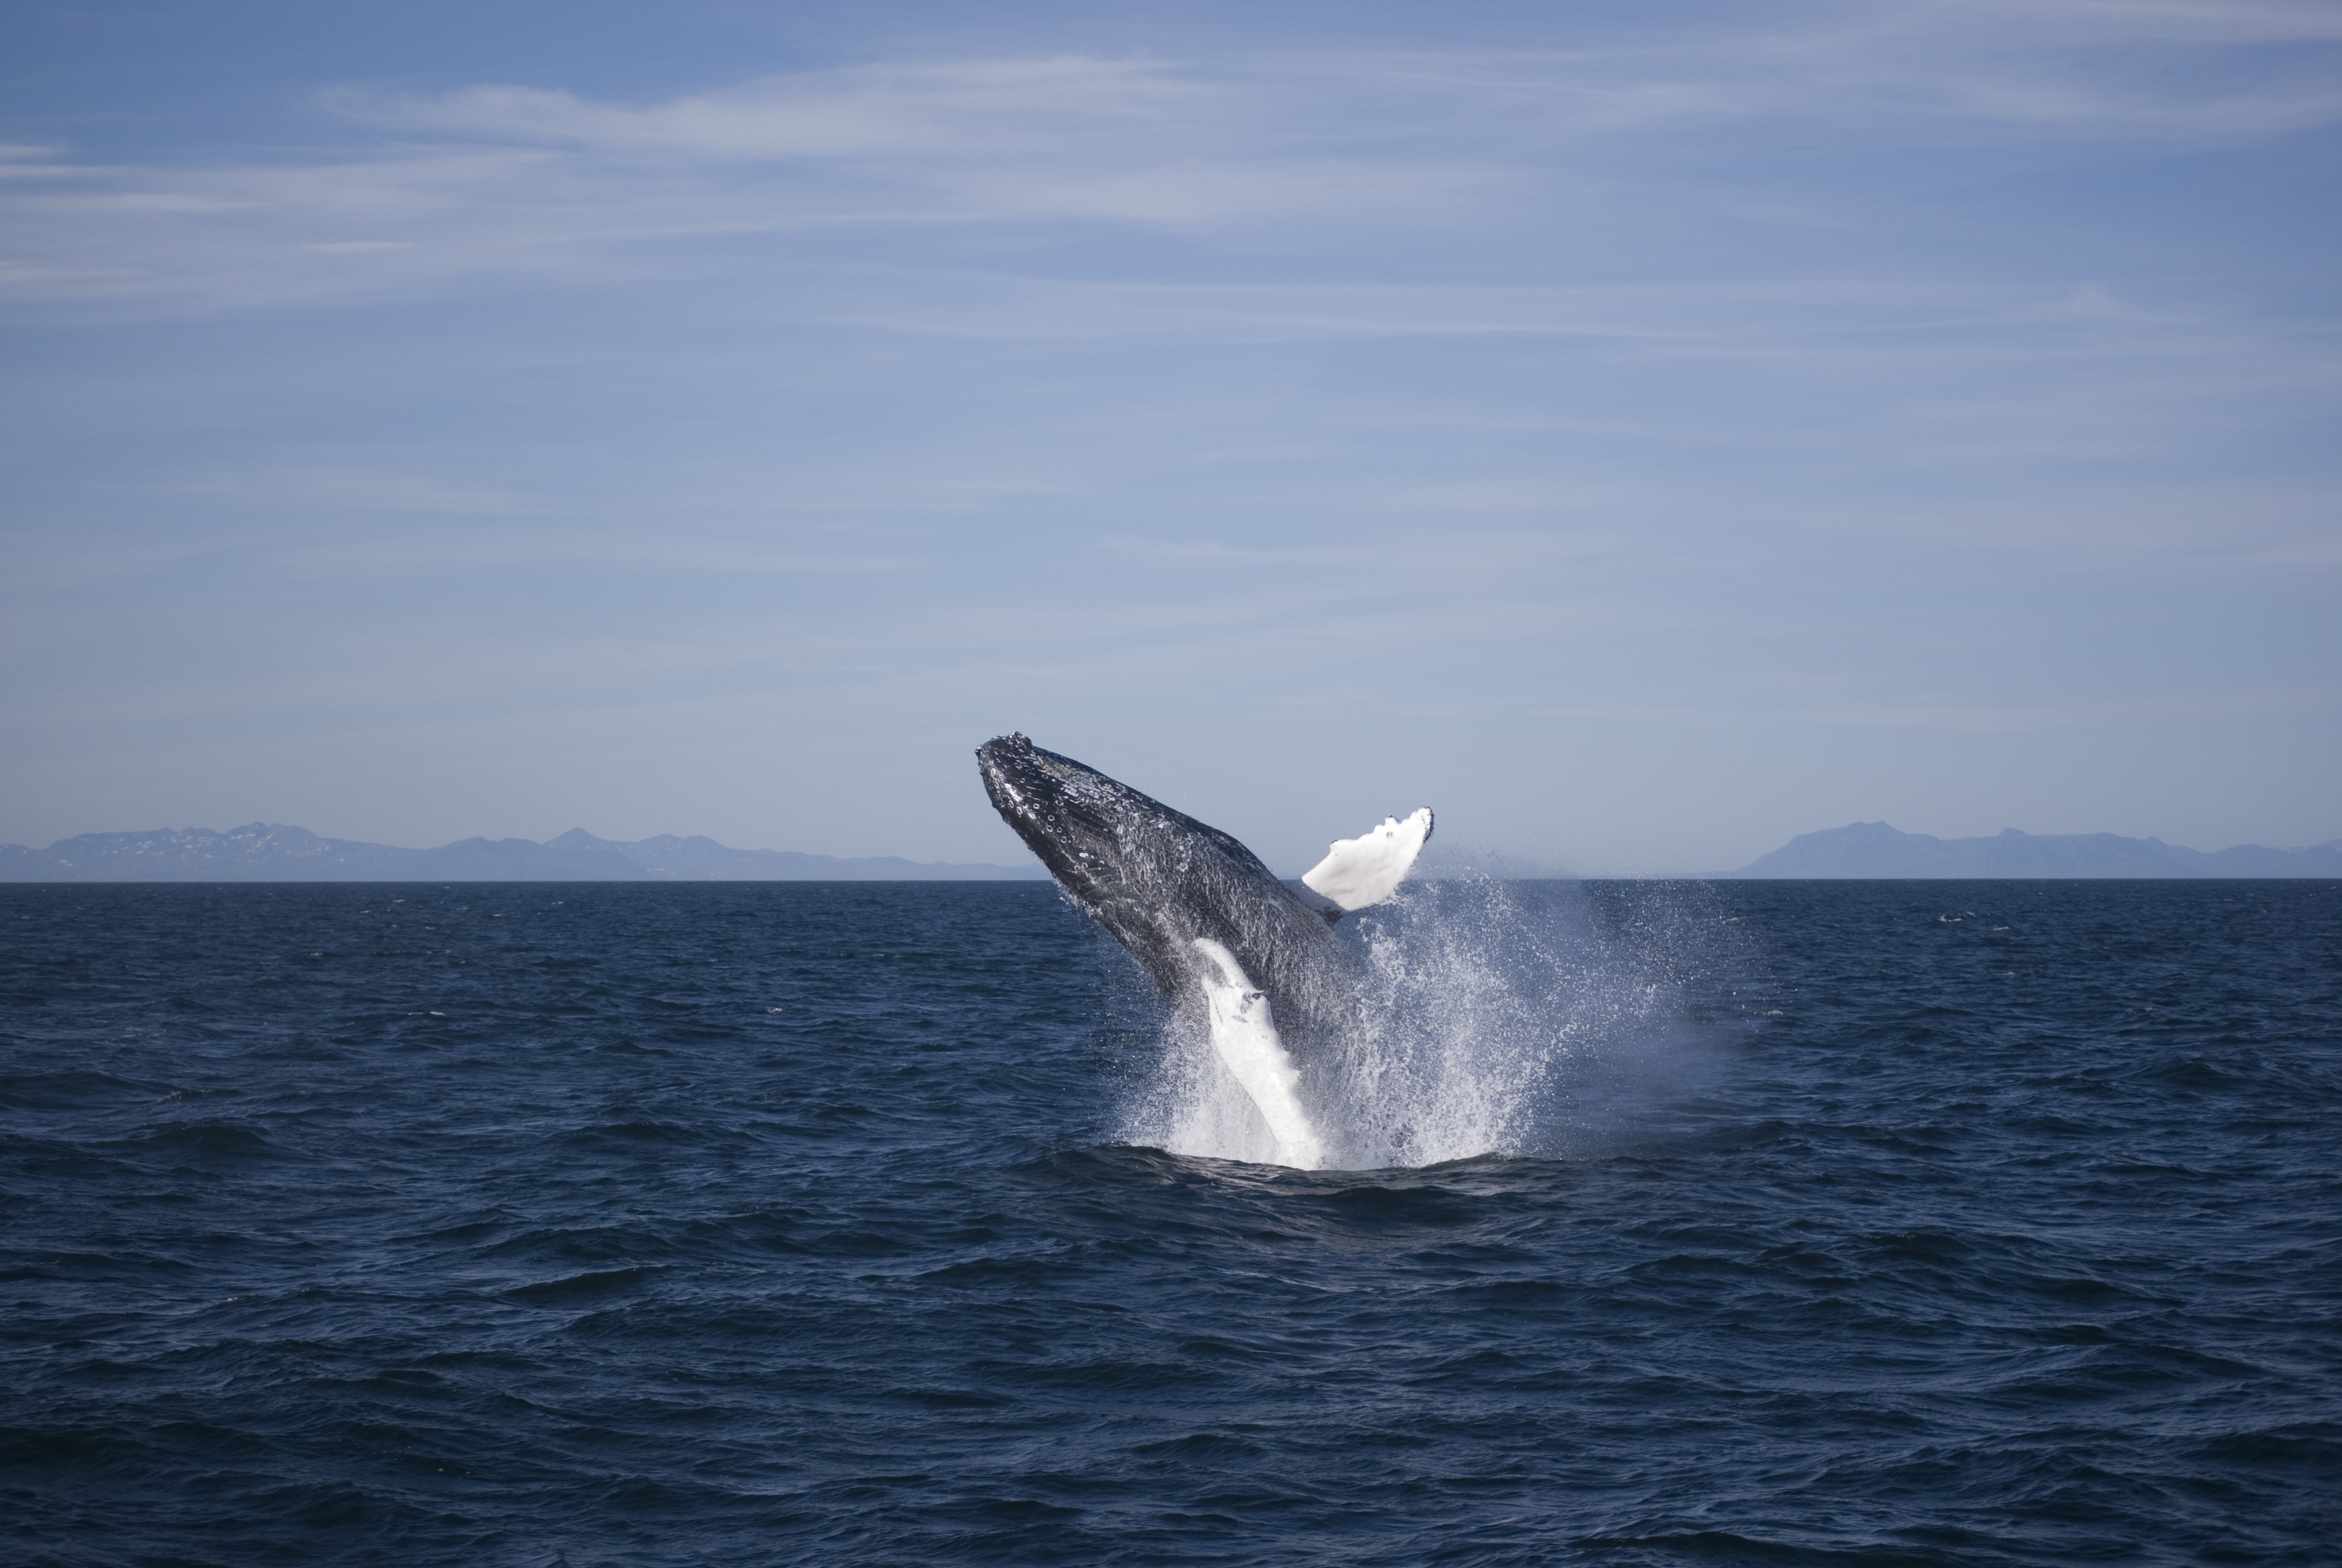 Humpback Whales are the most acrobatic of the great whales found off Reykjavík, in Faxaflói Bay.